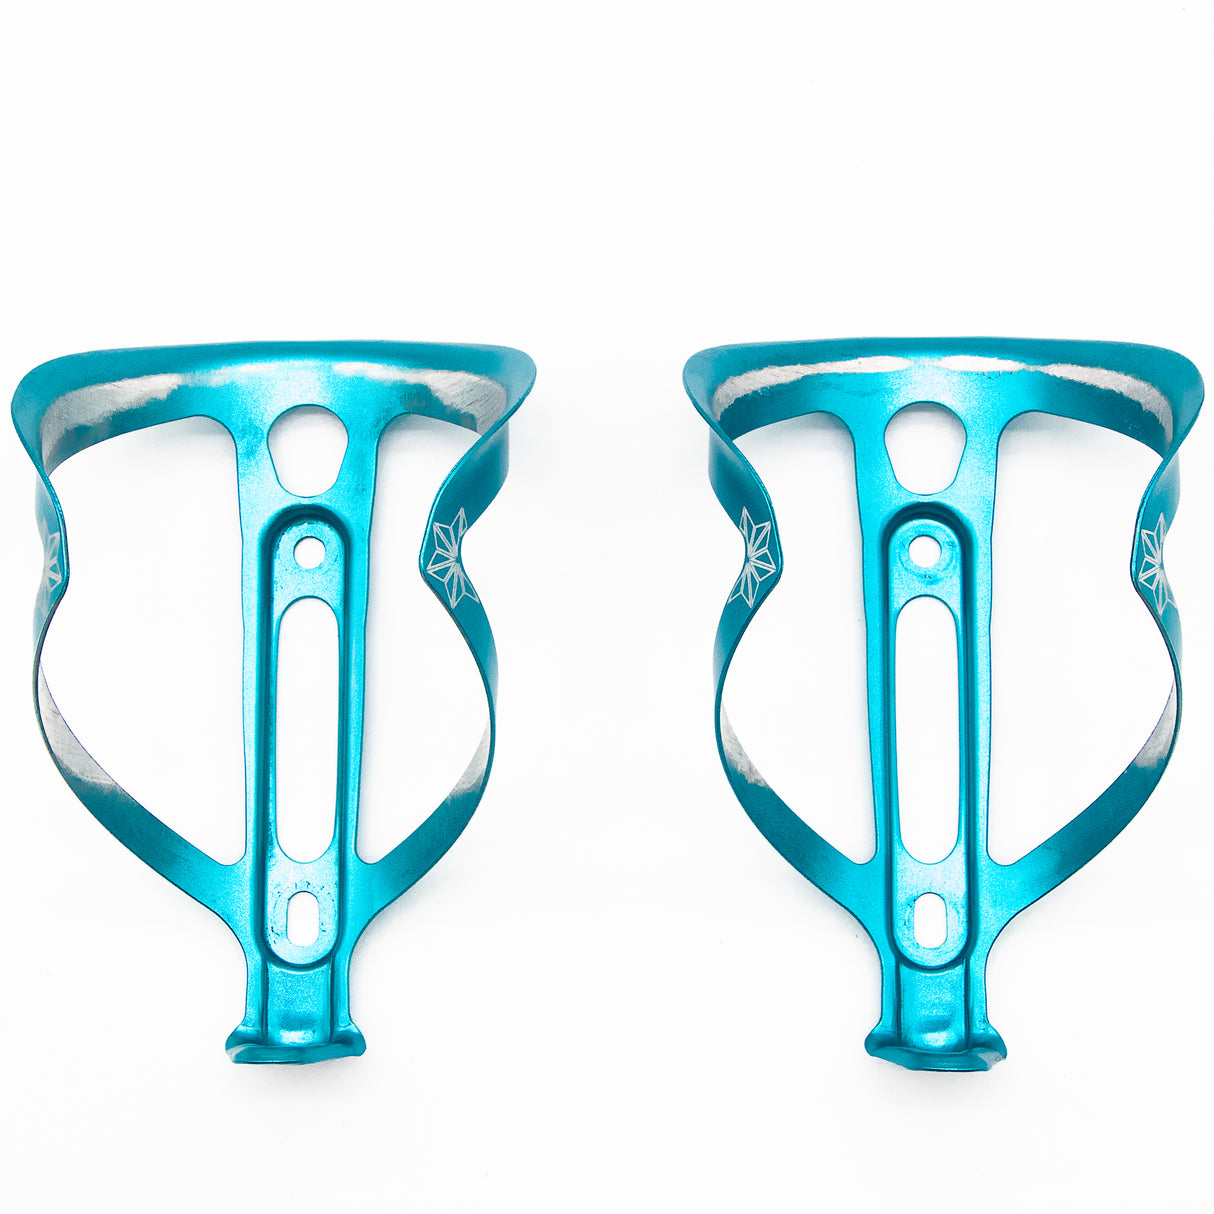 Supacaz Fly Cage Ano Bottle Cages Blue Pair 35g